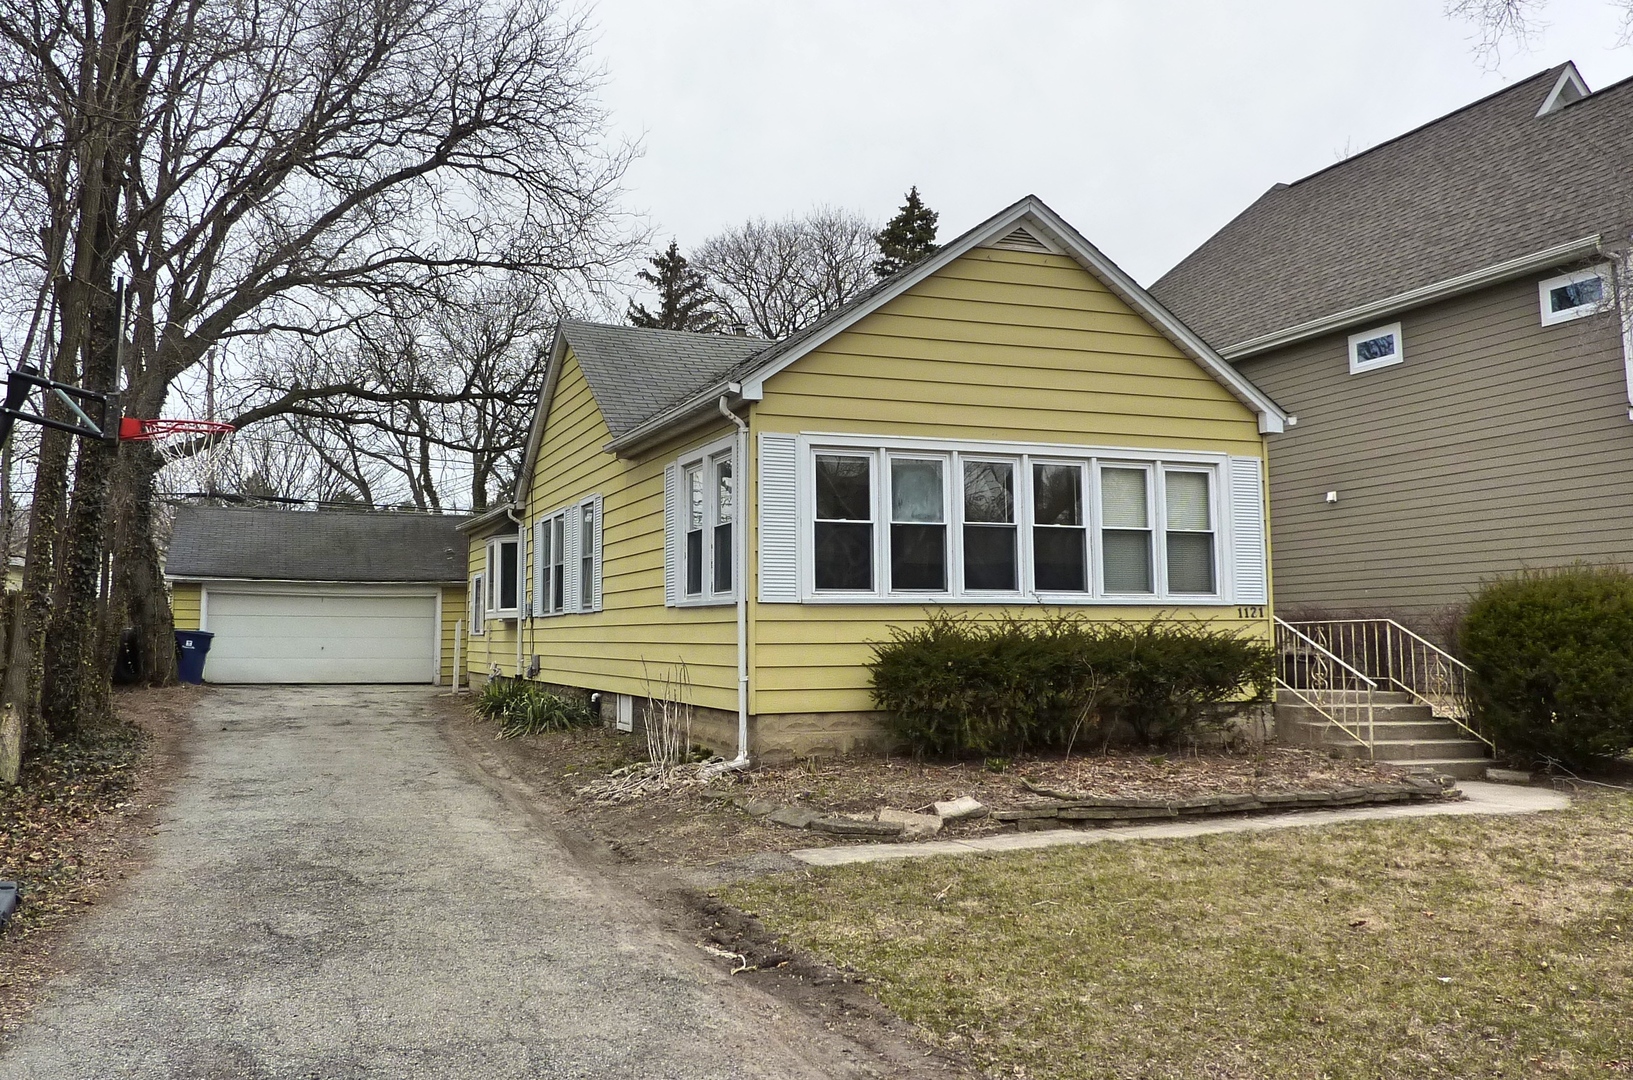 Photo of 1121 Webster NAPERVILLE IL 60563